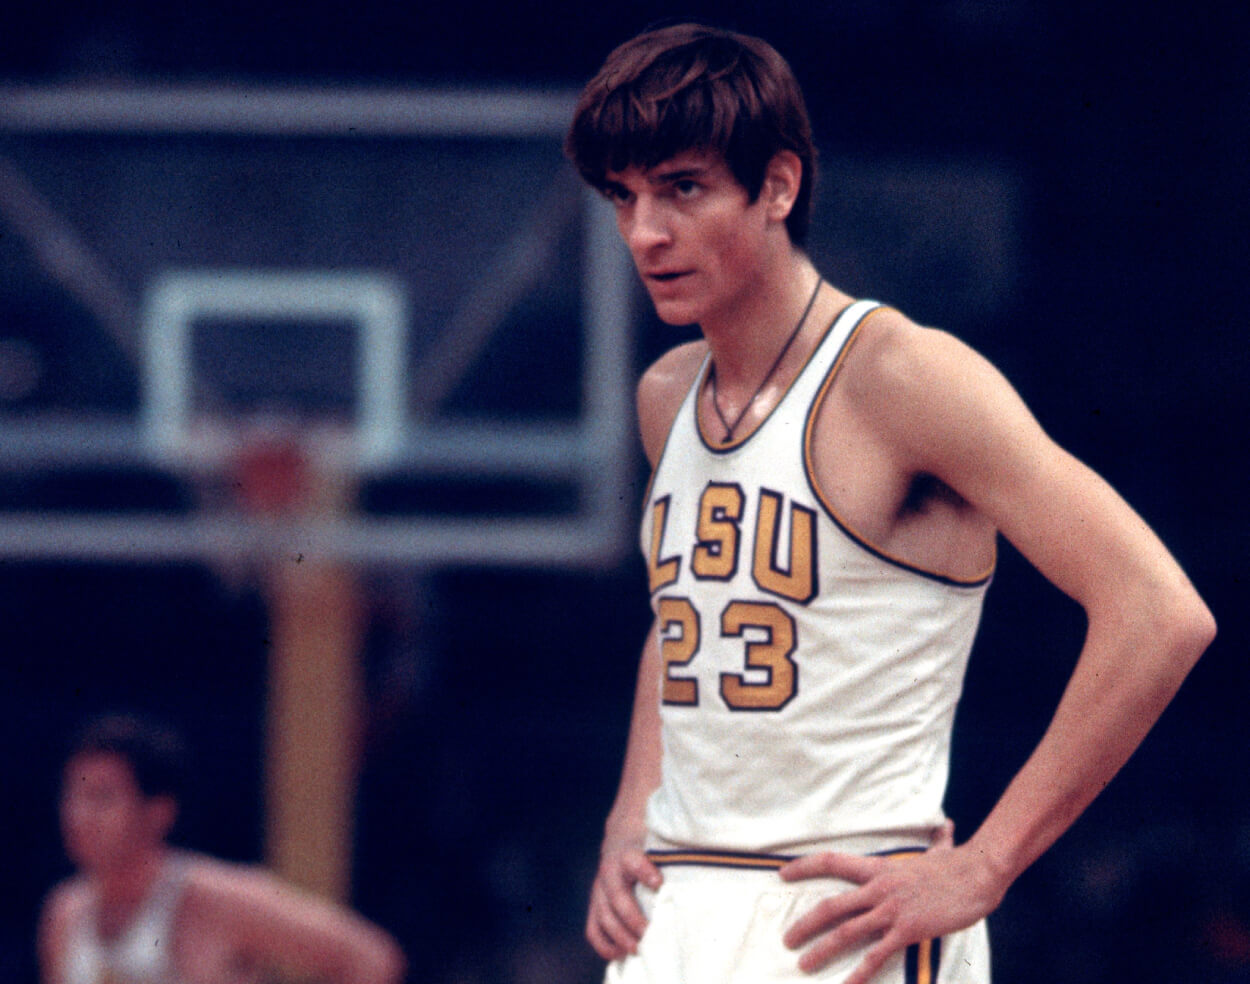 Pete Maravich of the LSU Tigers stands on the court.